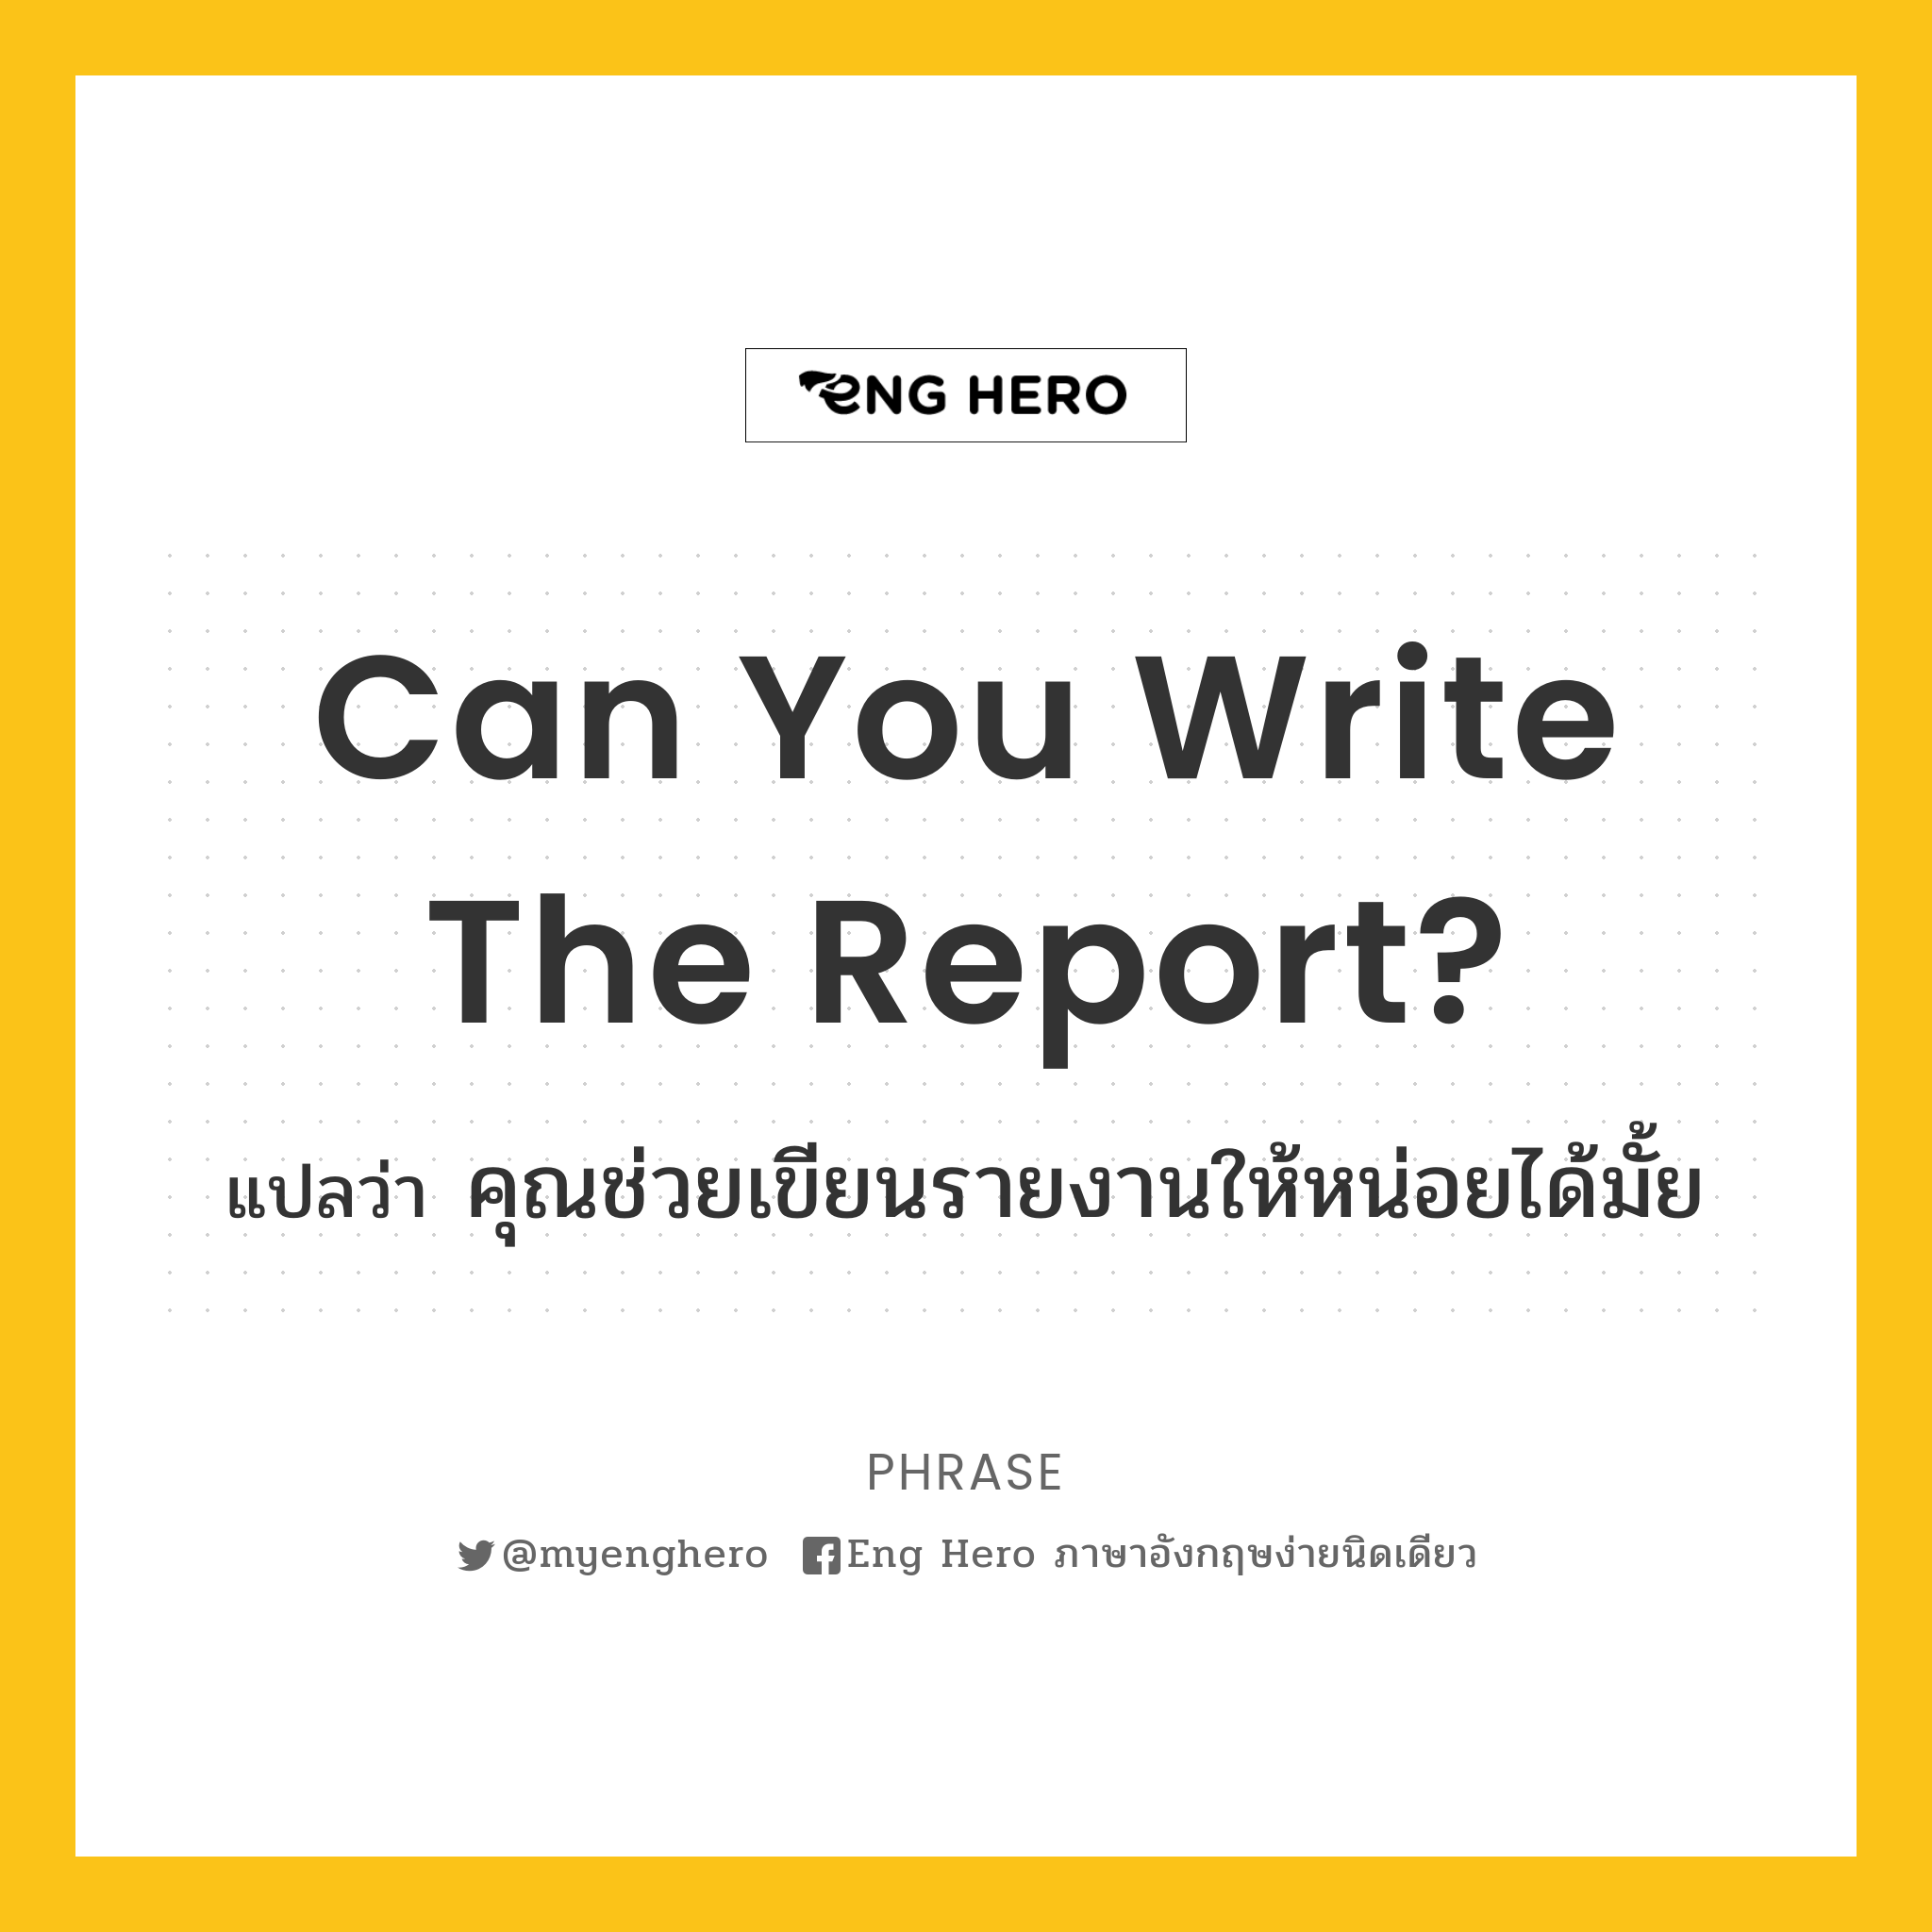 Can you write the report?